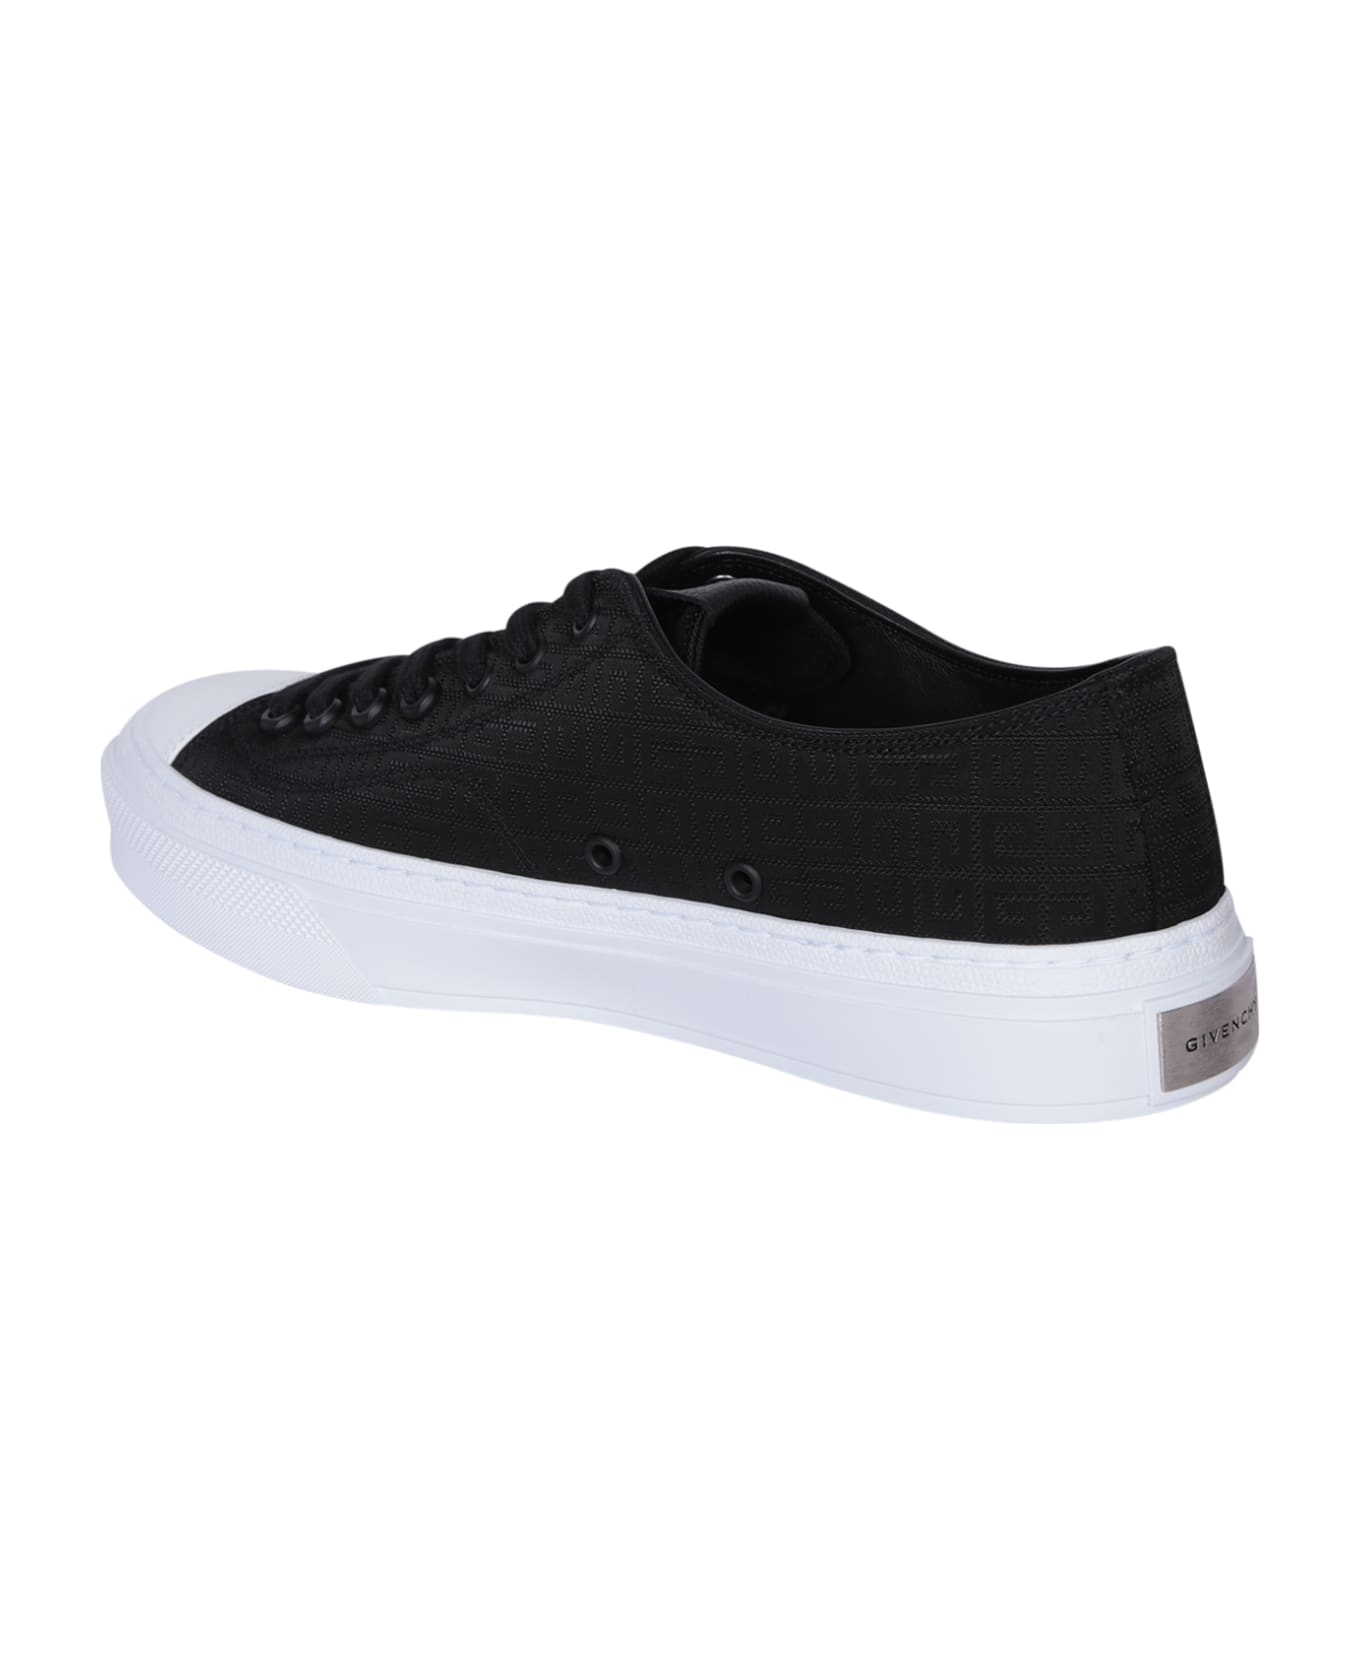 Givenchy City Low Sneakers - Black